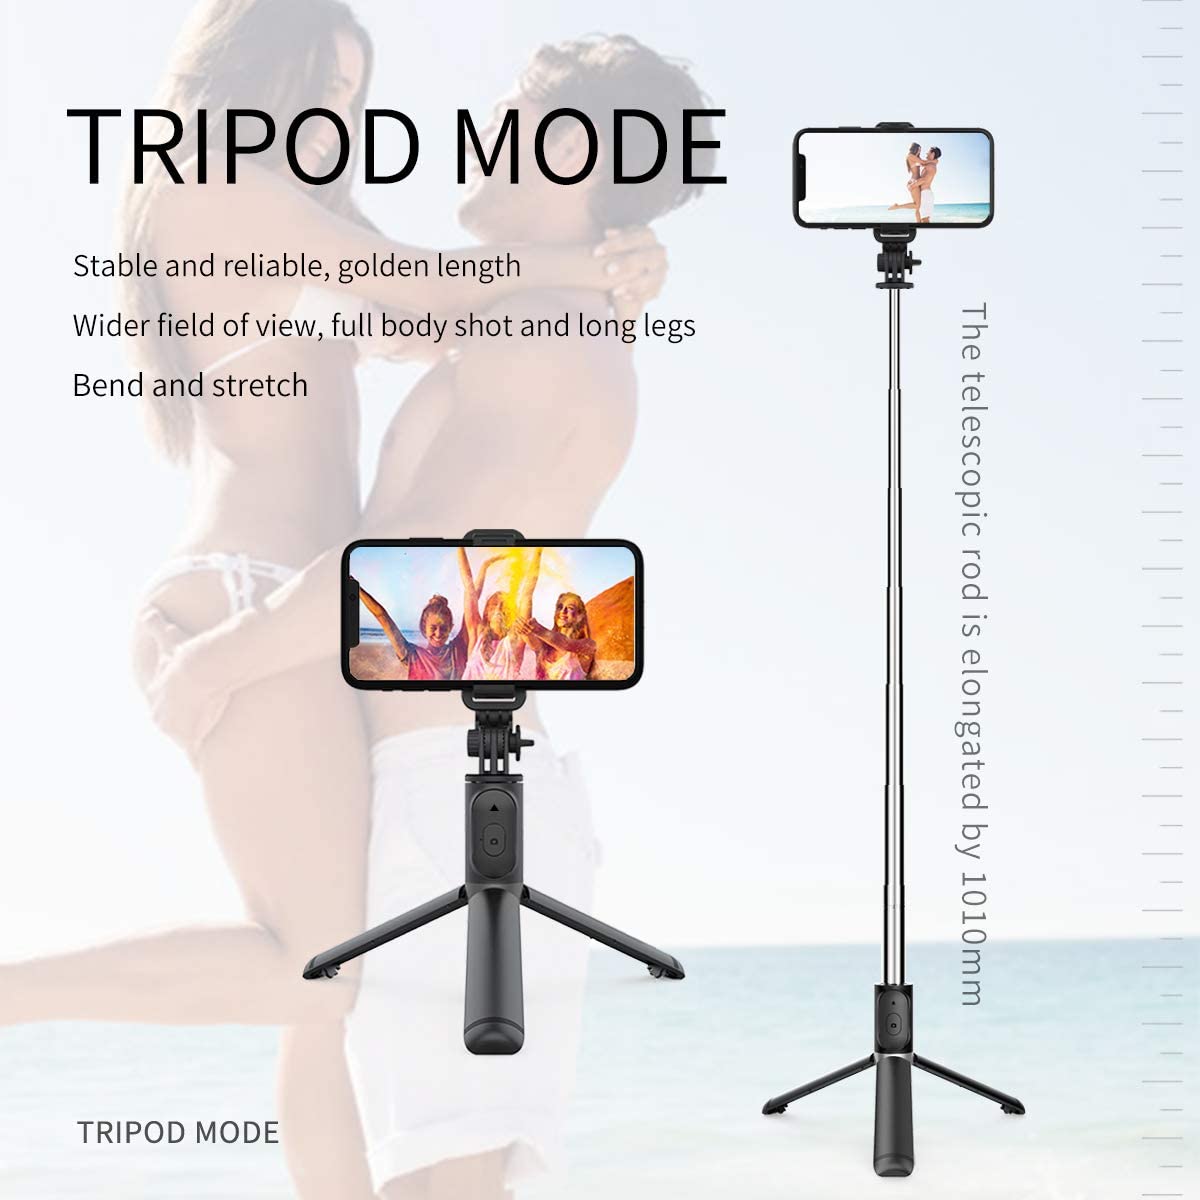 3-in-1 Multifunctional Selfie Stick & Tripod Stand with Remote (Black)